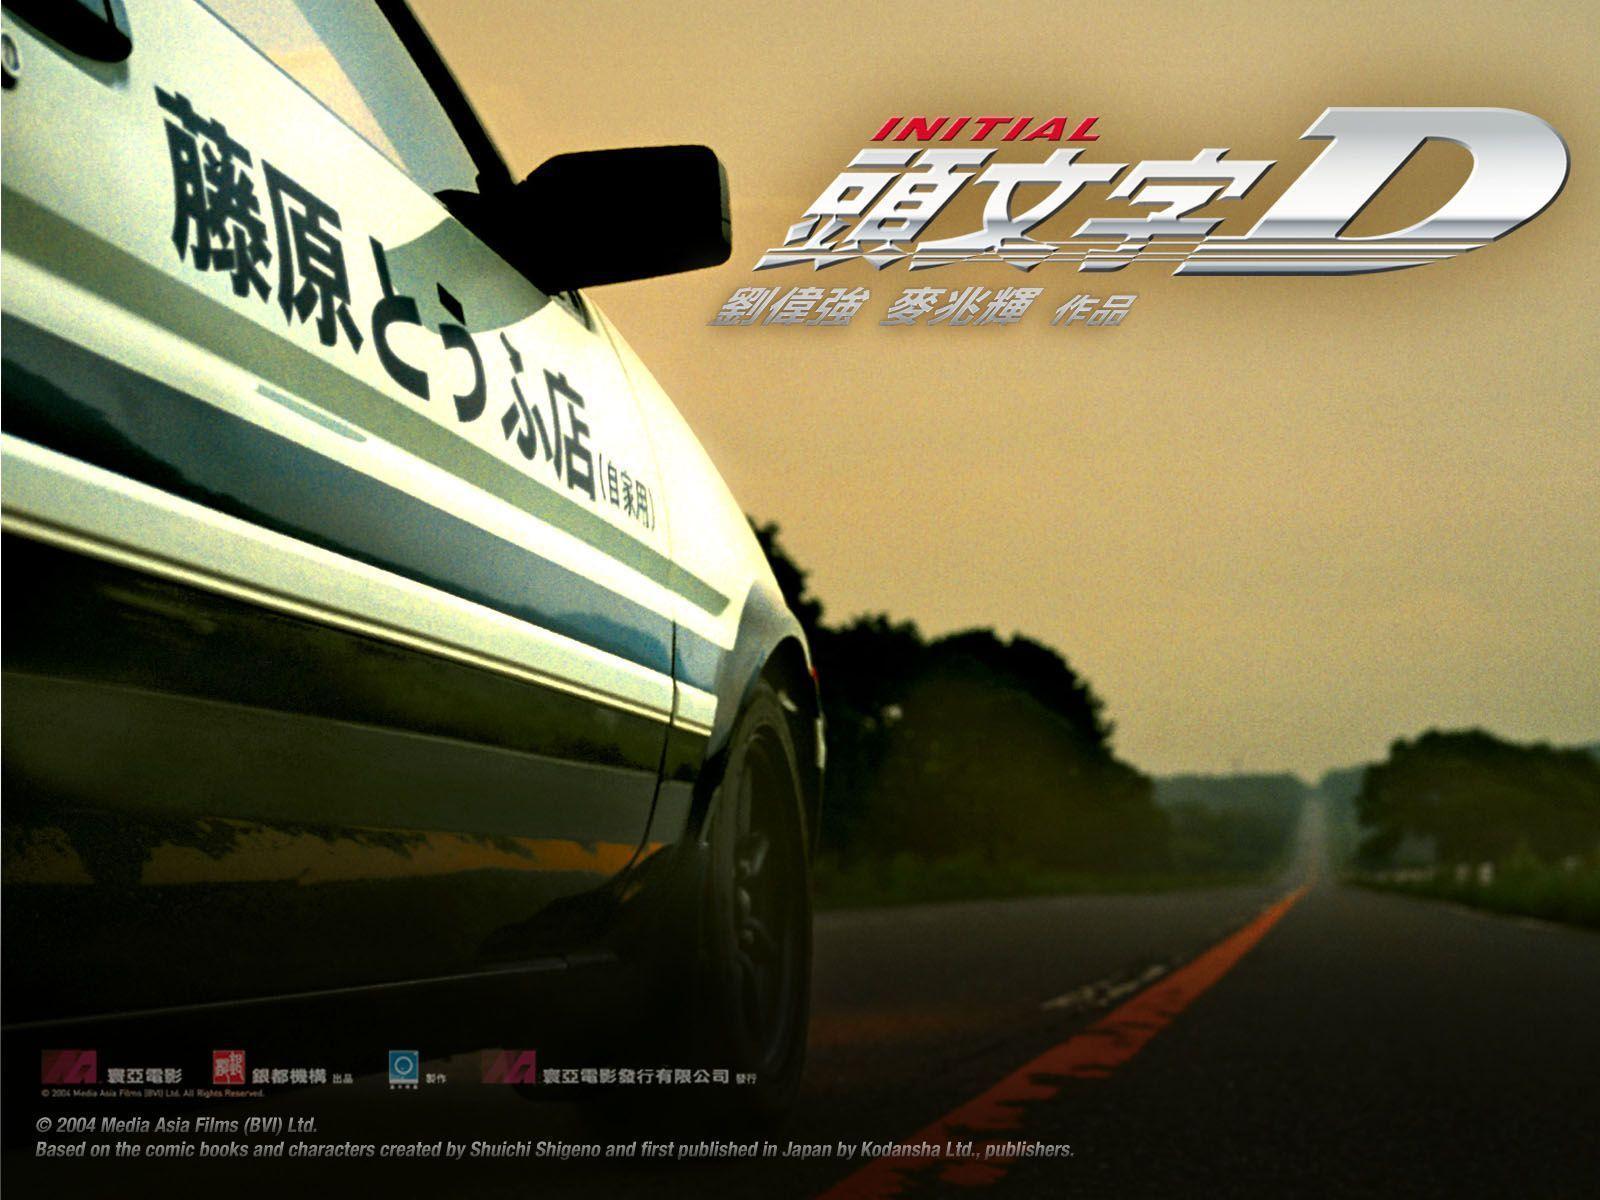 Free Download Wallpapers Initial D 1600x10 For Your Desktop Mobile Tablet Explore 68 Initial D Wallpapers Initial D Wallpaper Hd Initial Wallpaper For Computer Cute Wallpapers With Initials